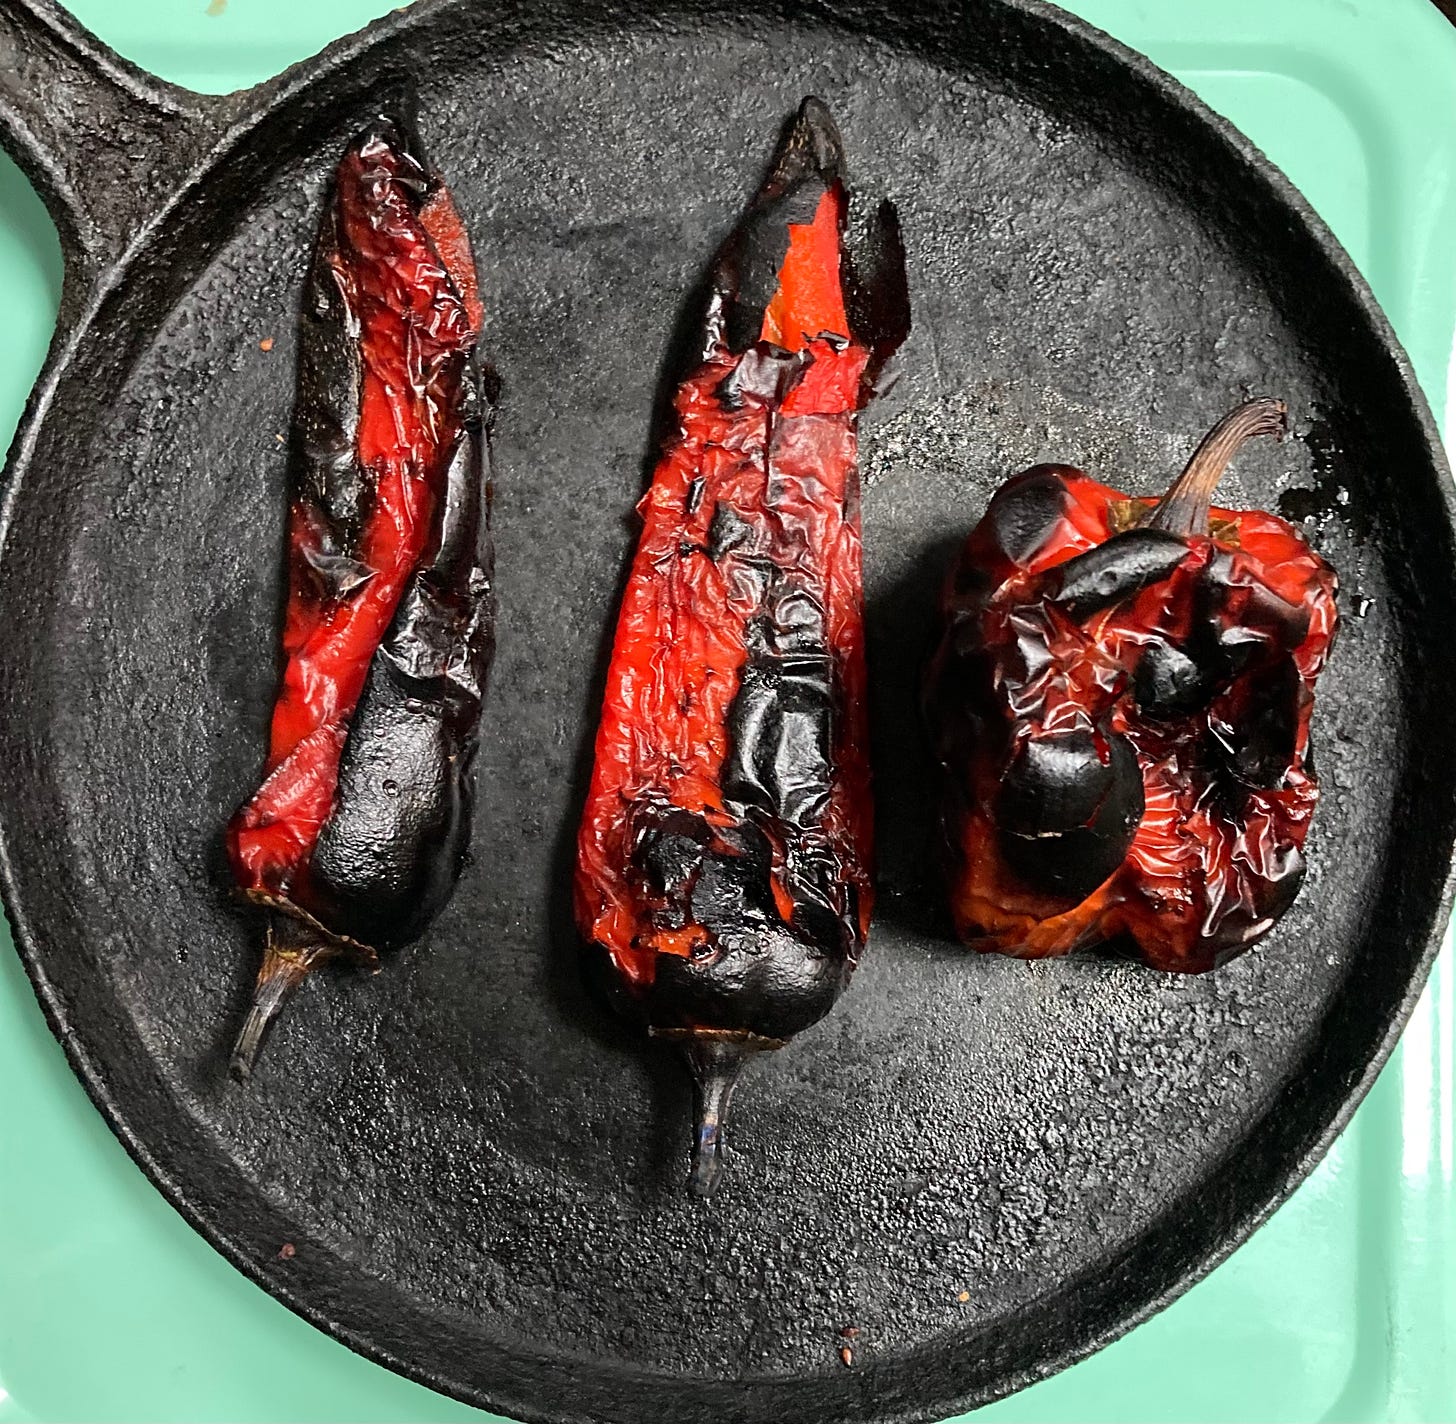 Charred sweet peppers cooked under the broiler